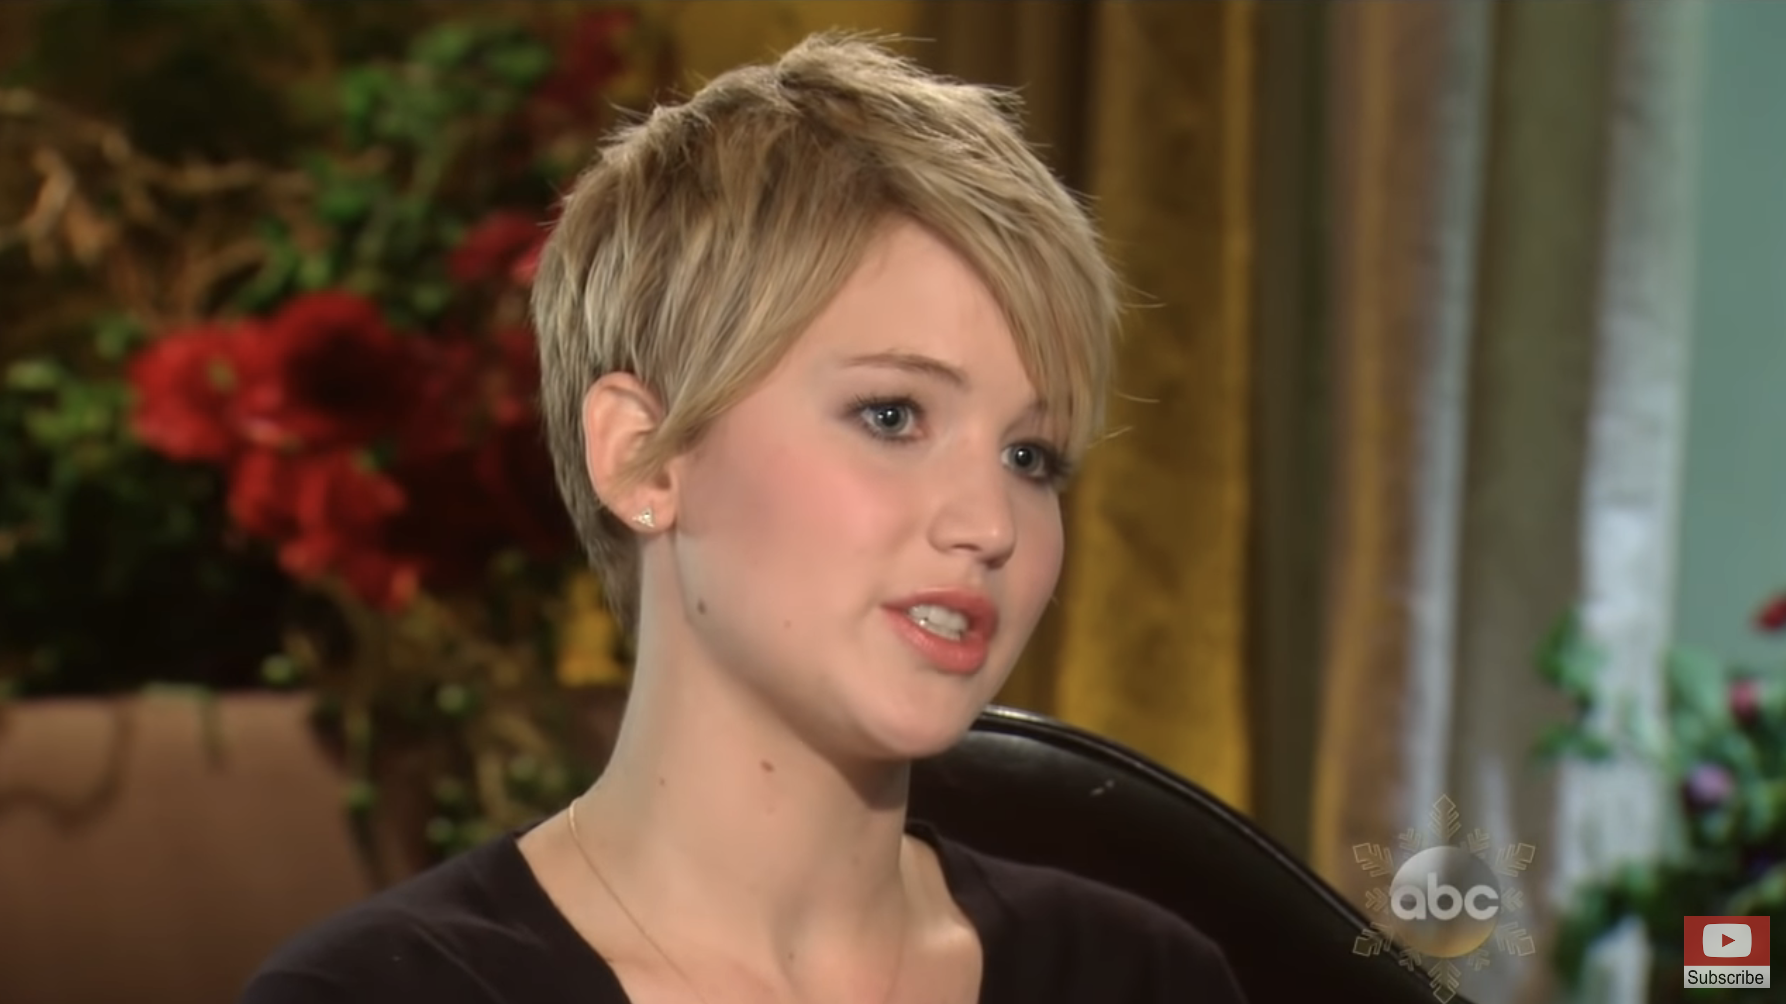 her during the interview with a pixie hair cut